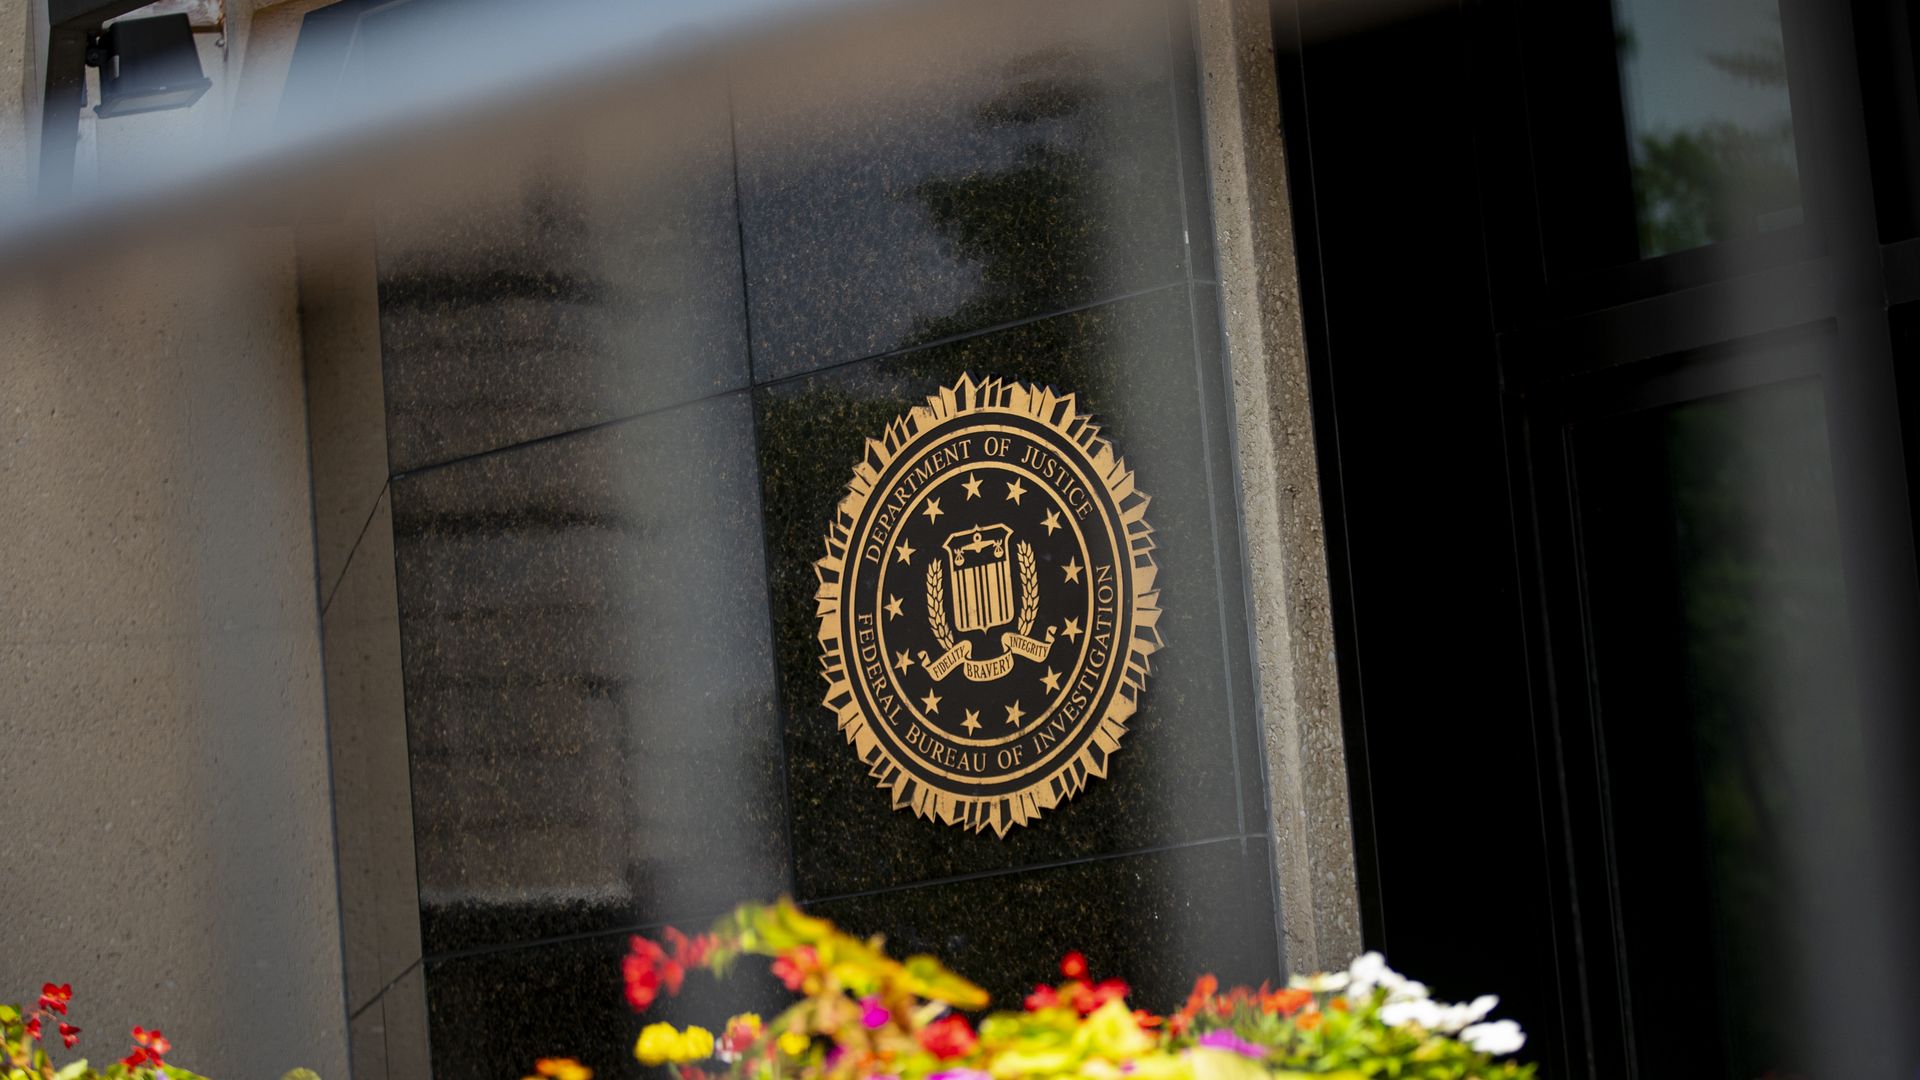 The FBI's seal on the outside of its headquarters in Washington, D.C.